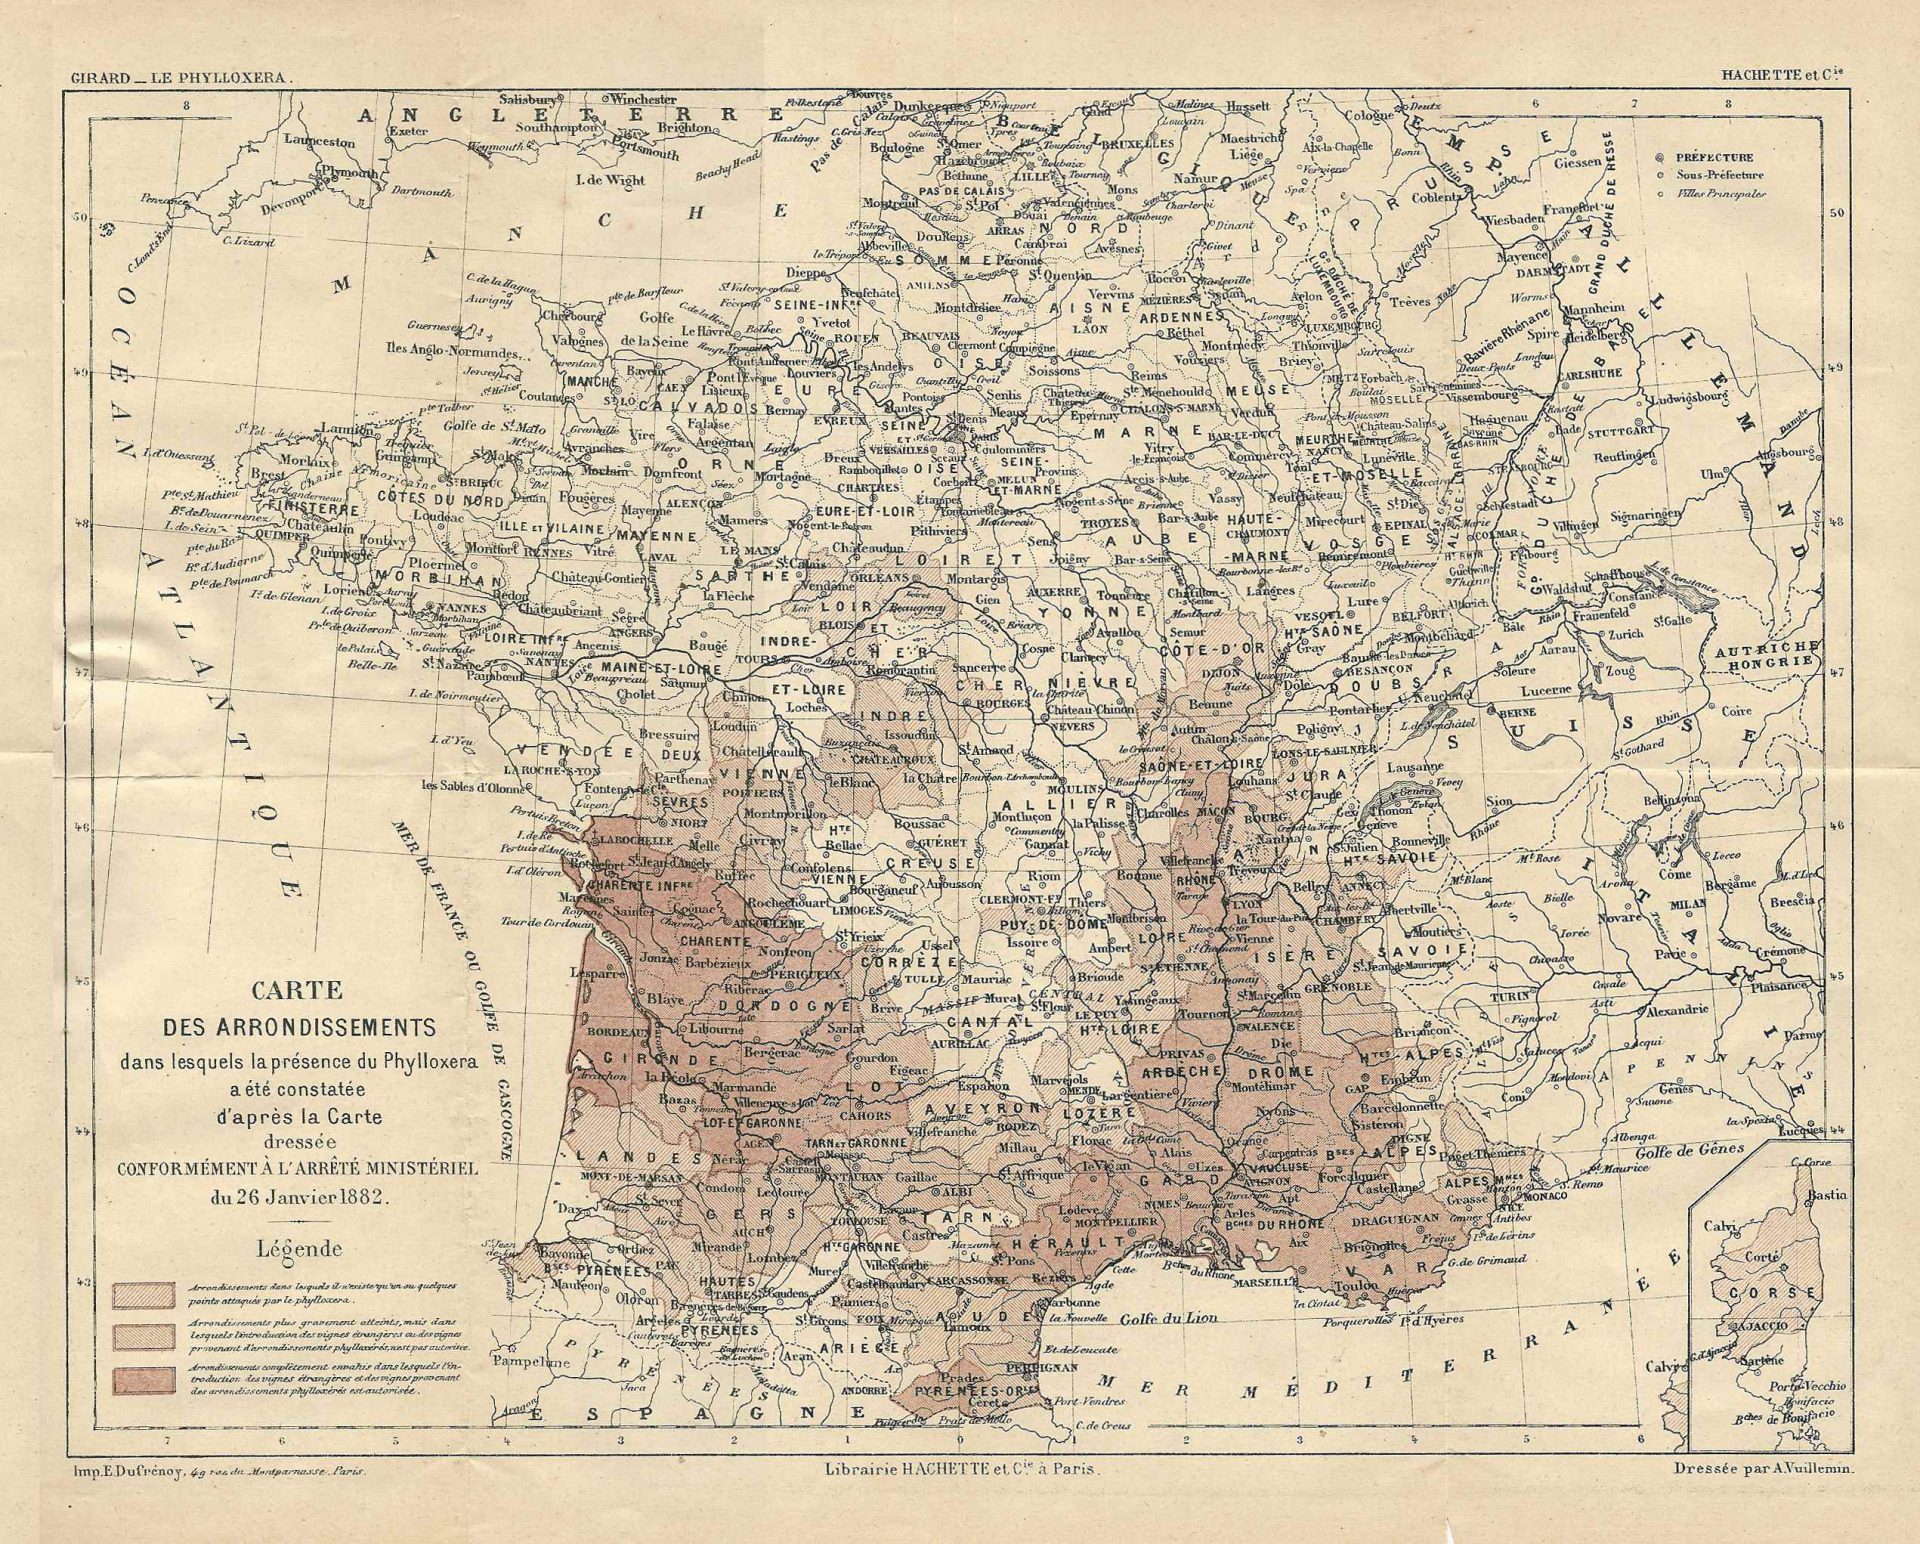 Map of the spread of Phylloxera in France in 1882